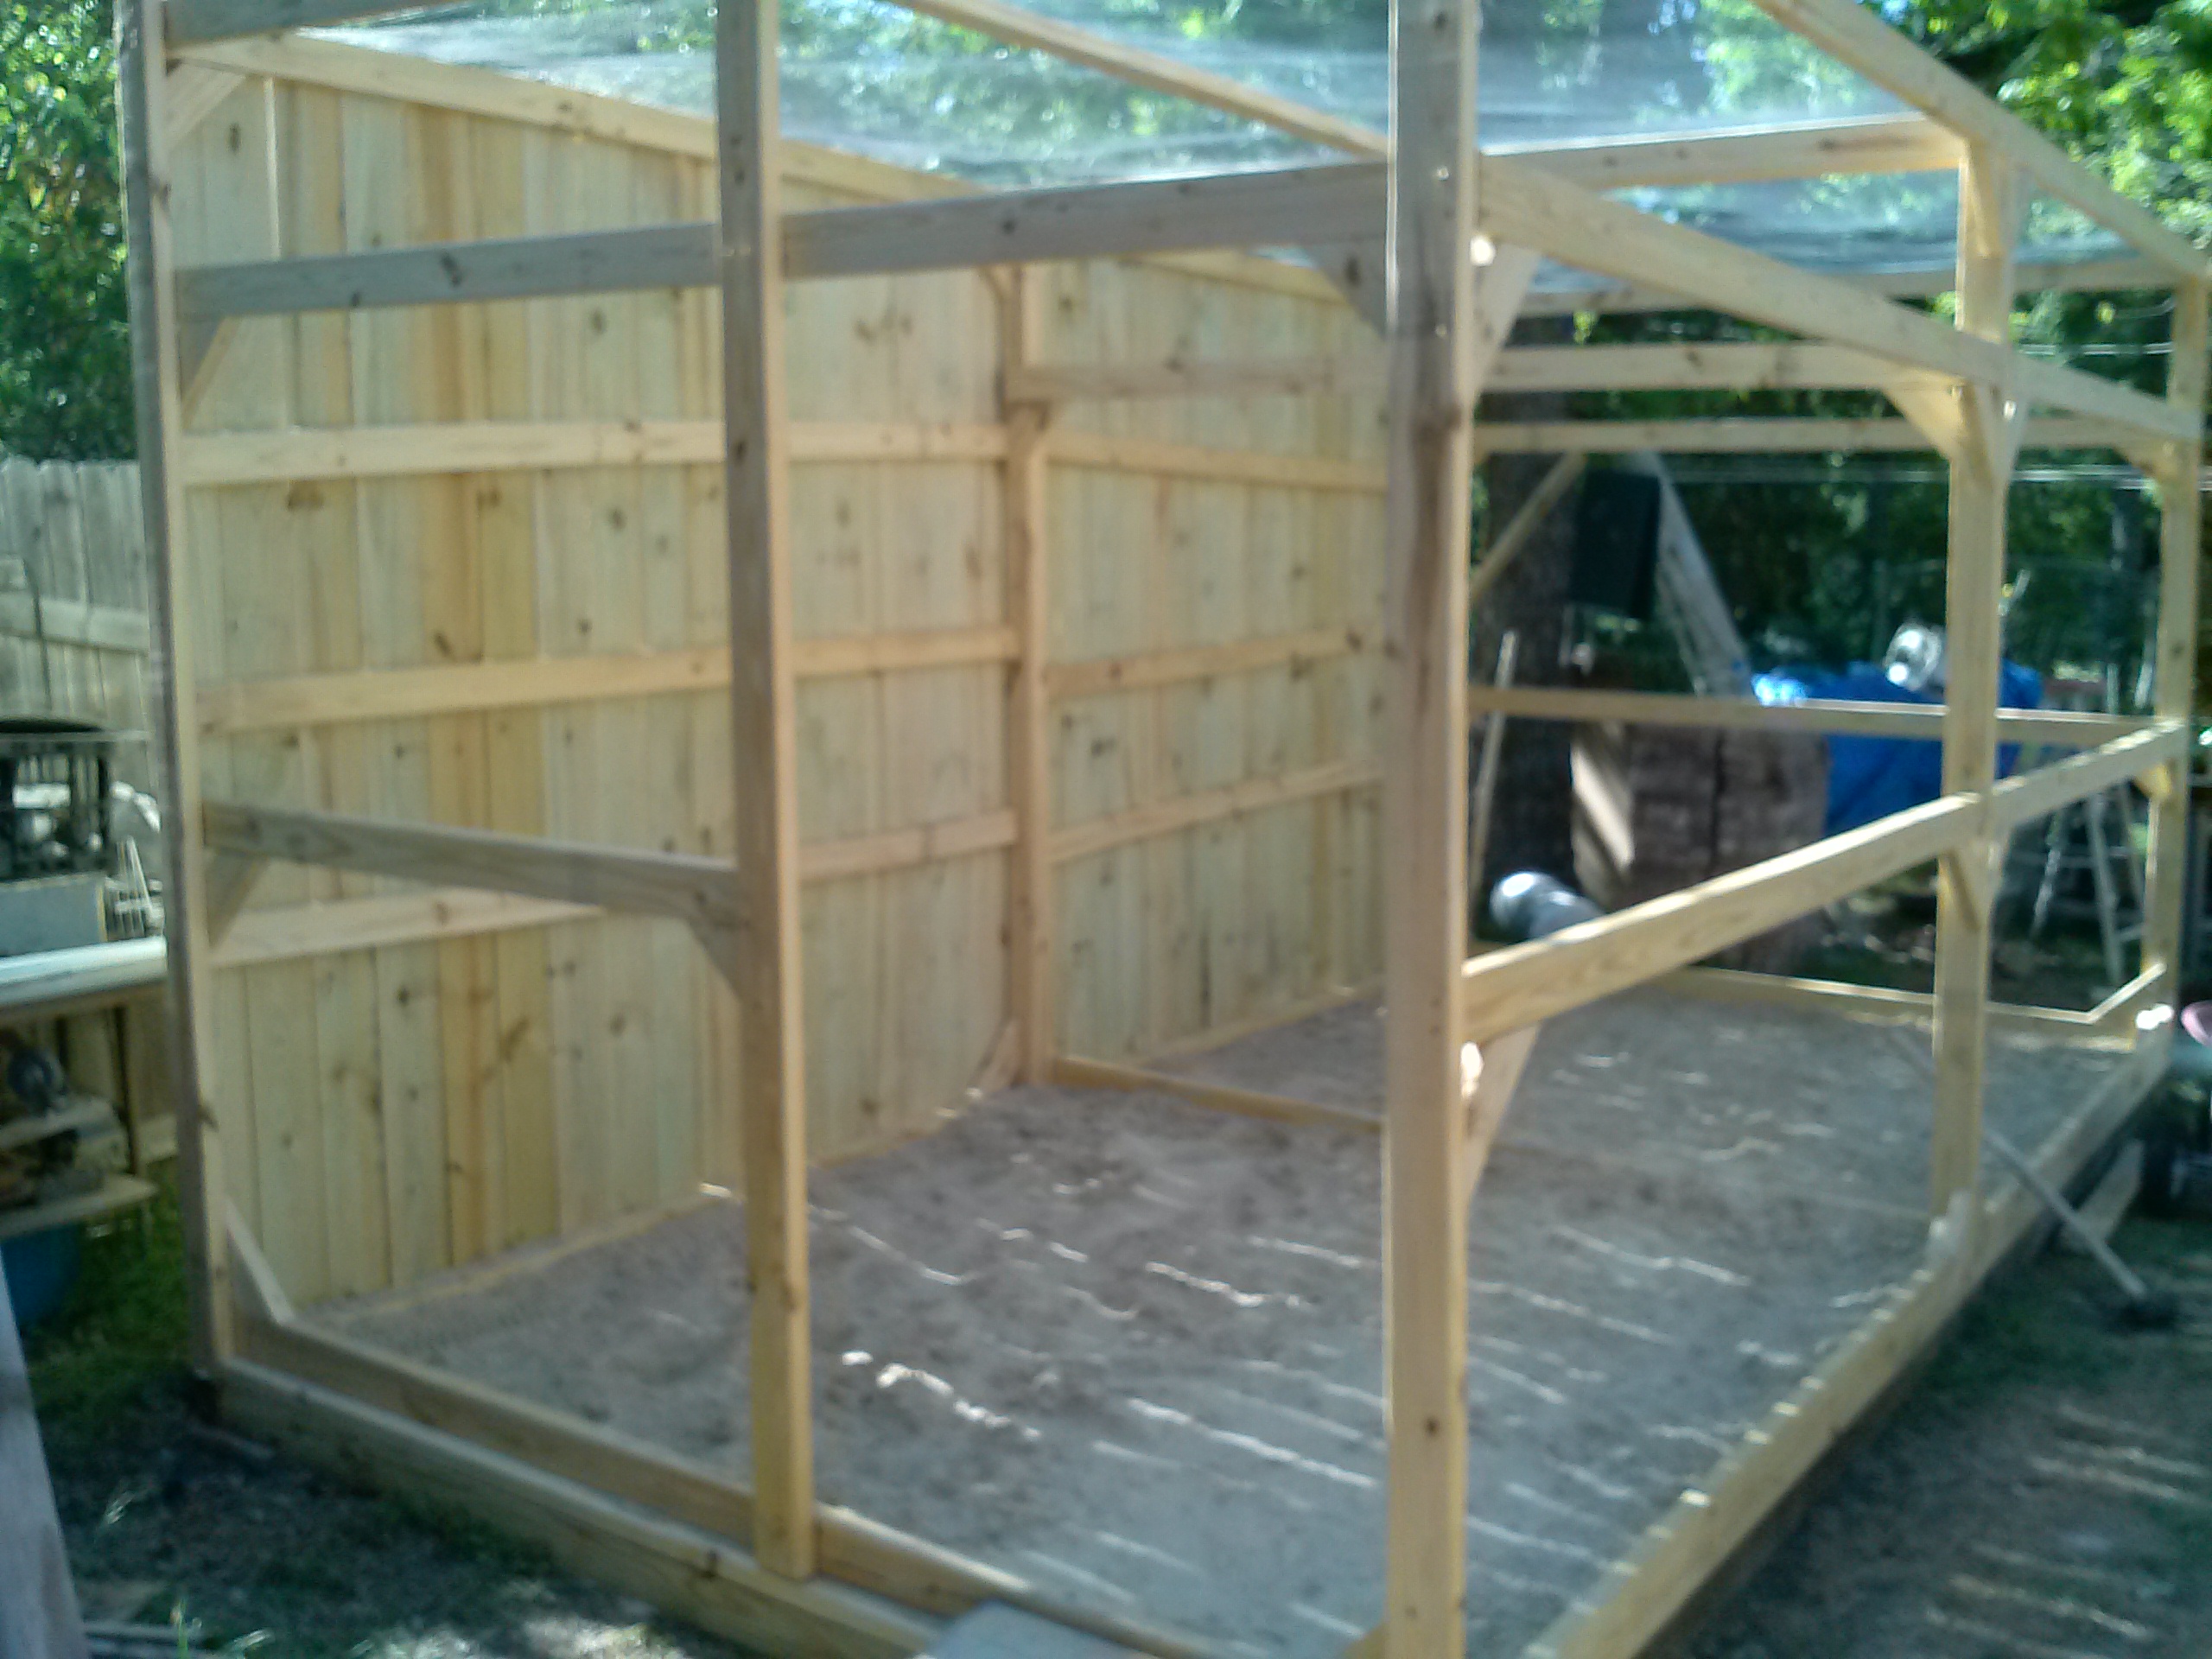 Top wire and back wall up.